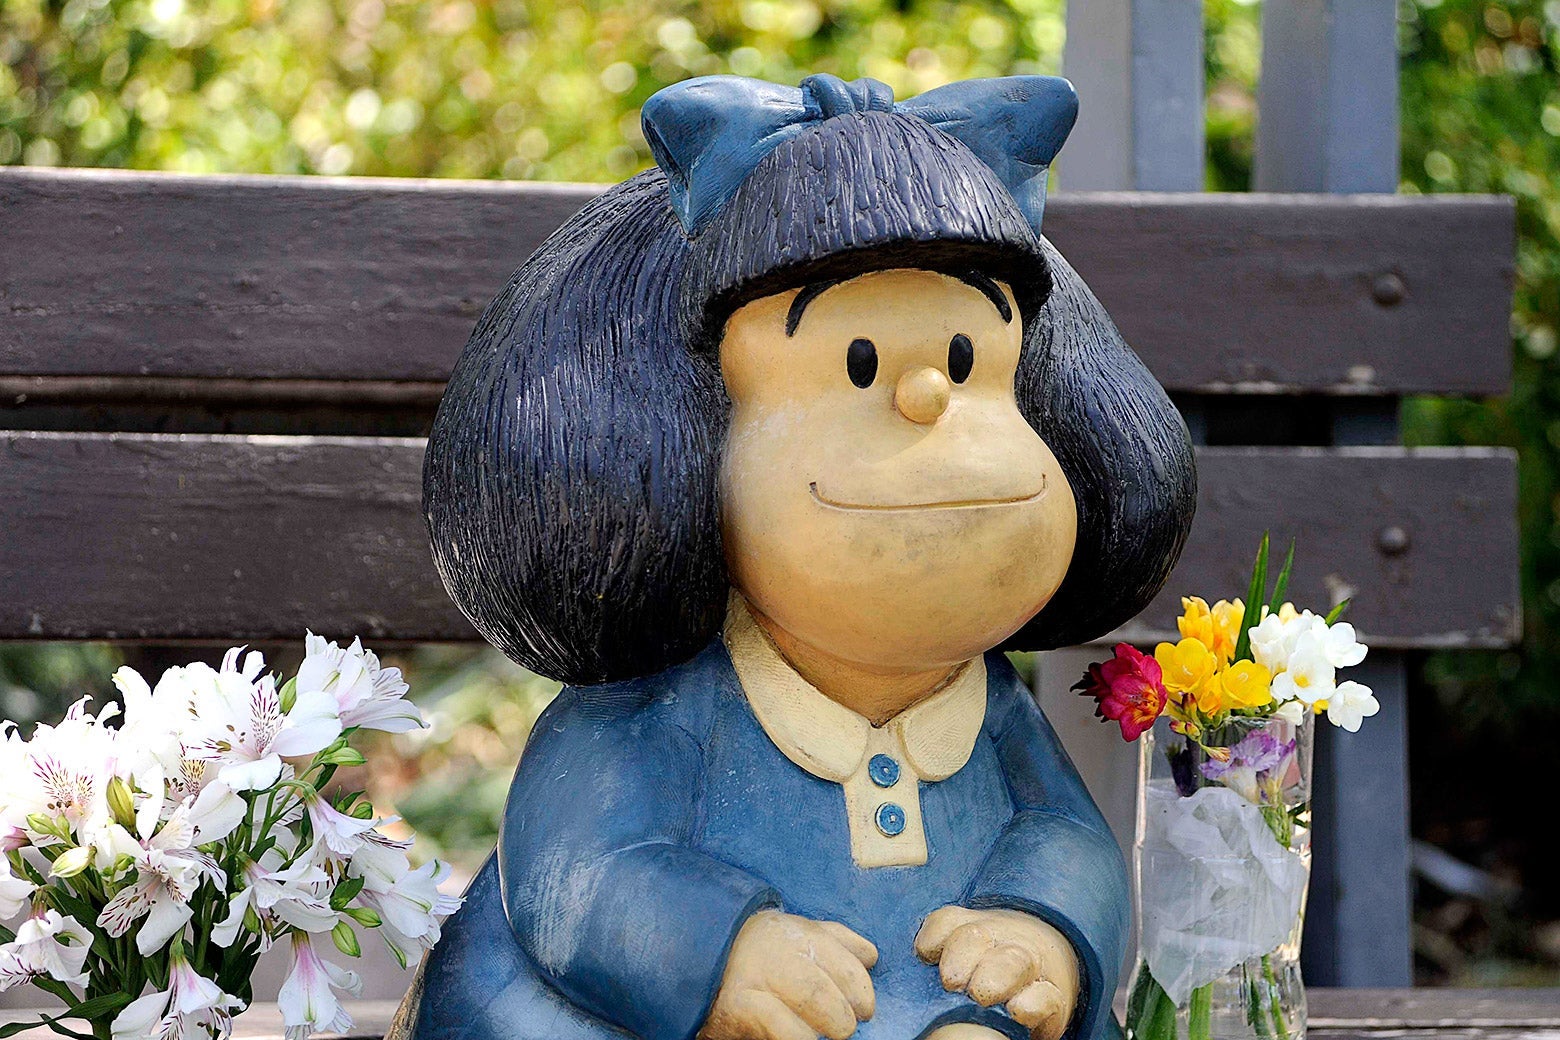 A statue depicting Mafalda is seen on a bench and near some flowers.